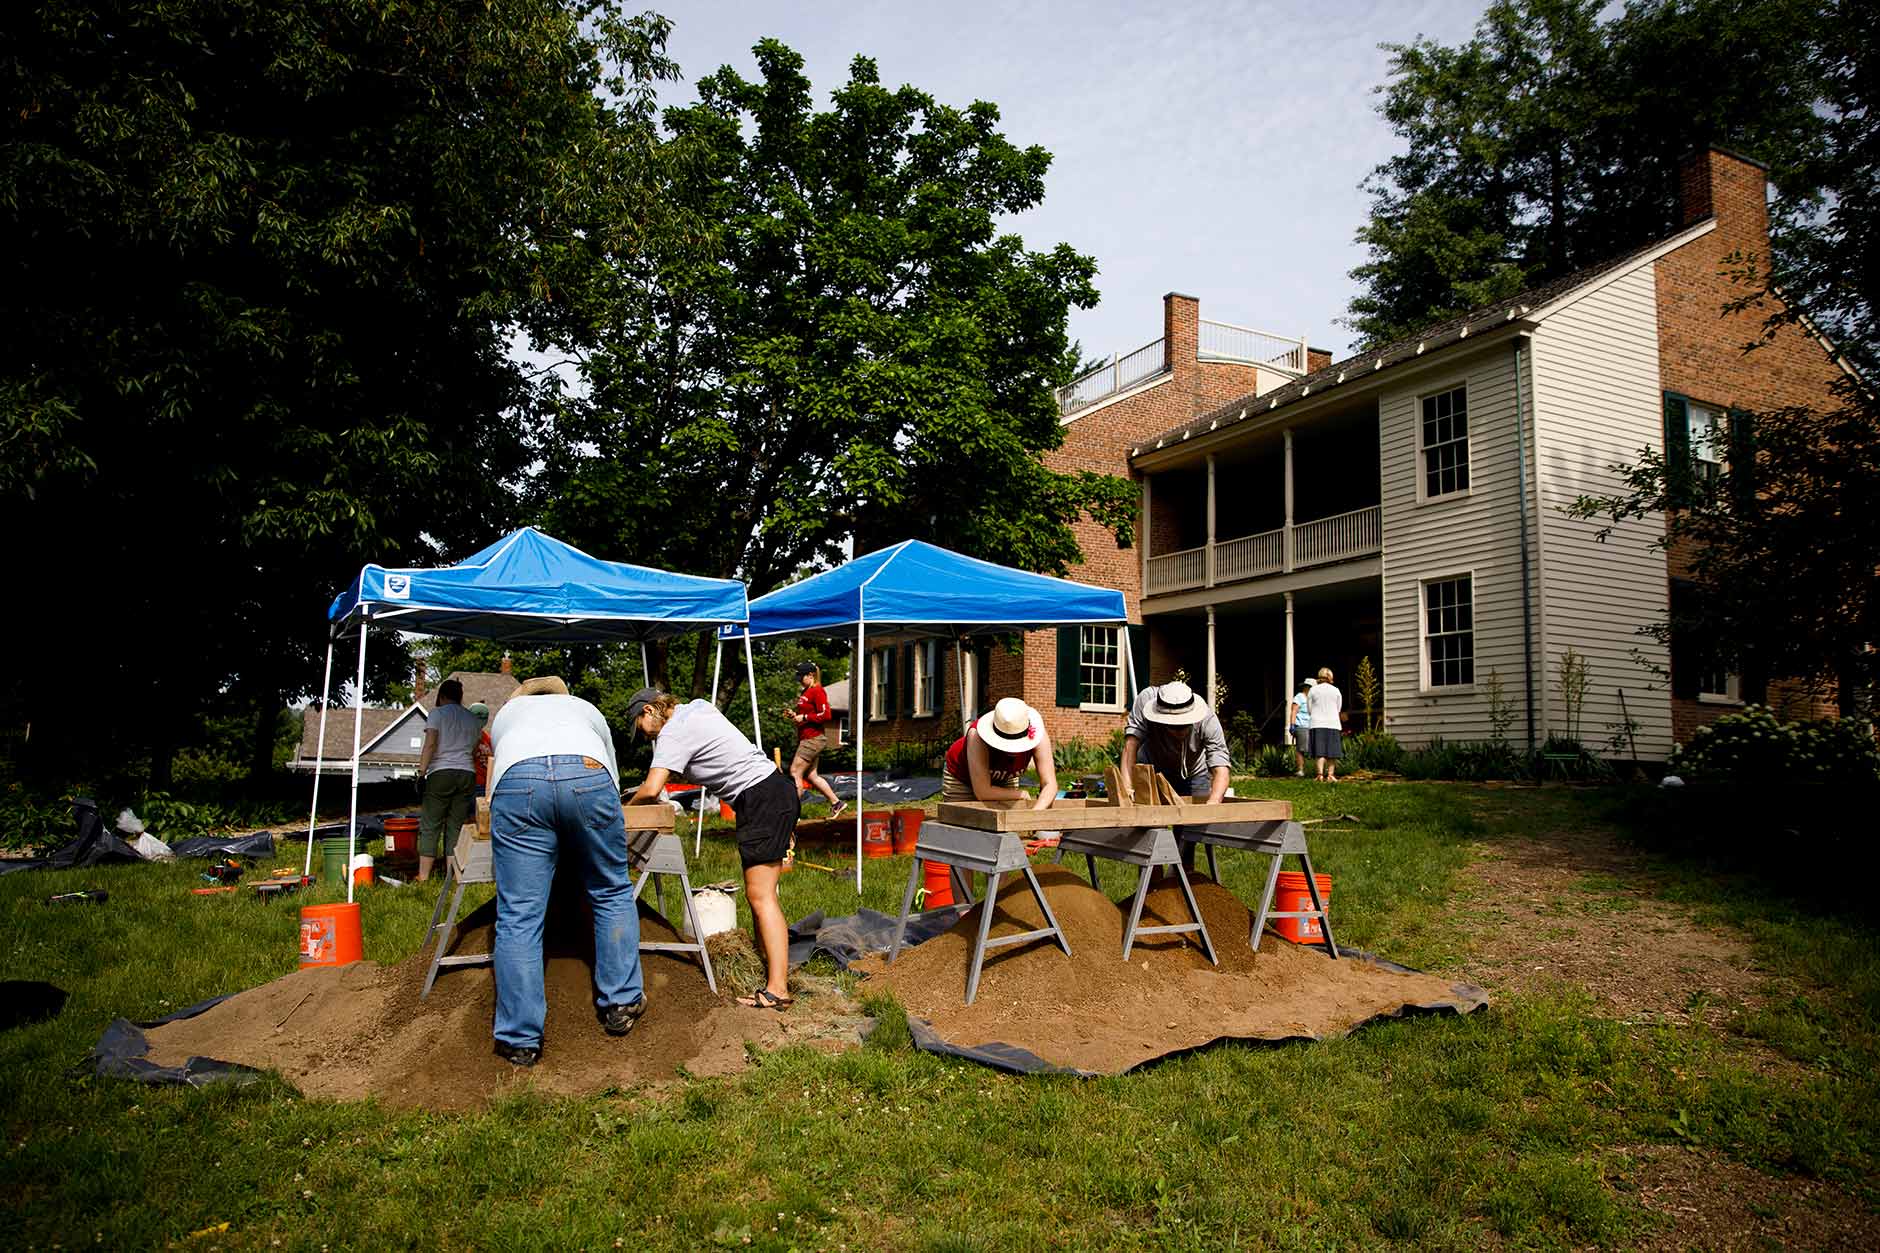 Students work with researchers from the Glenn A. Black Laboratory of Archaeology on the front lawn of Wylie House in Bloomington on Thursday, June 7, 2018. (James Brosher/IU Communications)